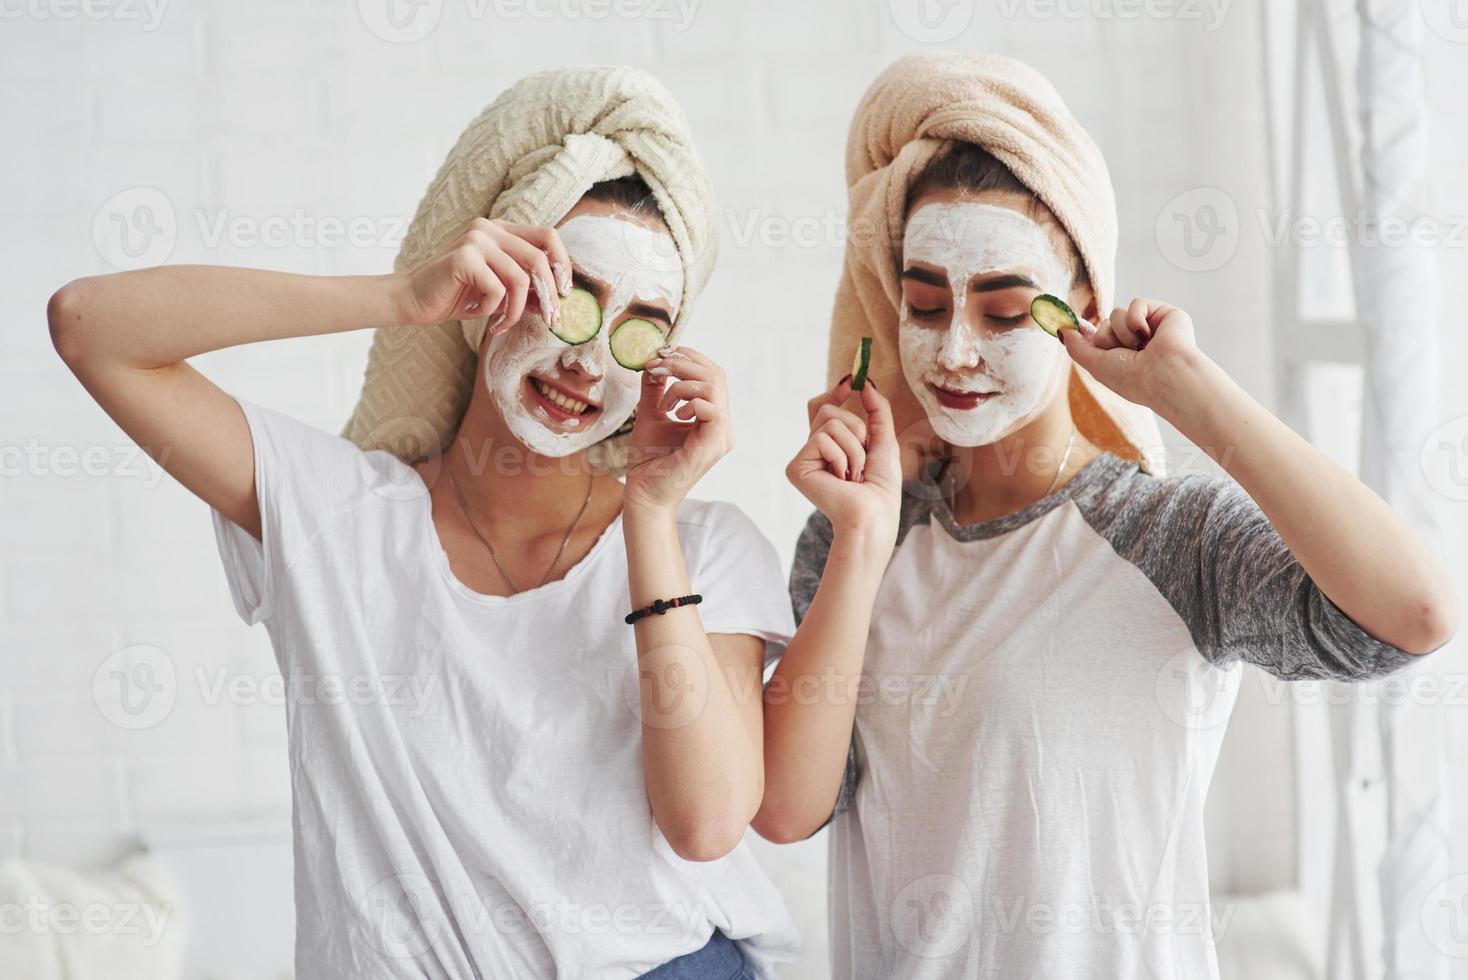 Dancing a little. Conception of skin care by using fresh cucumber rings and white mask on the face. Two female sisters have weekend at bedroom photo